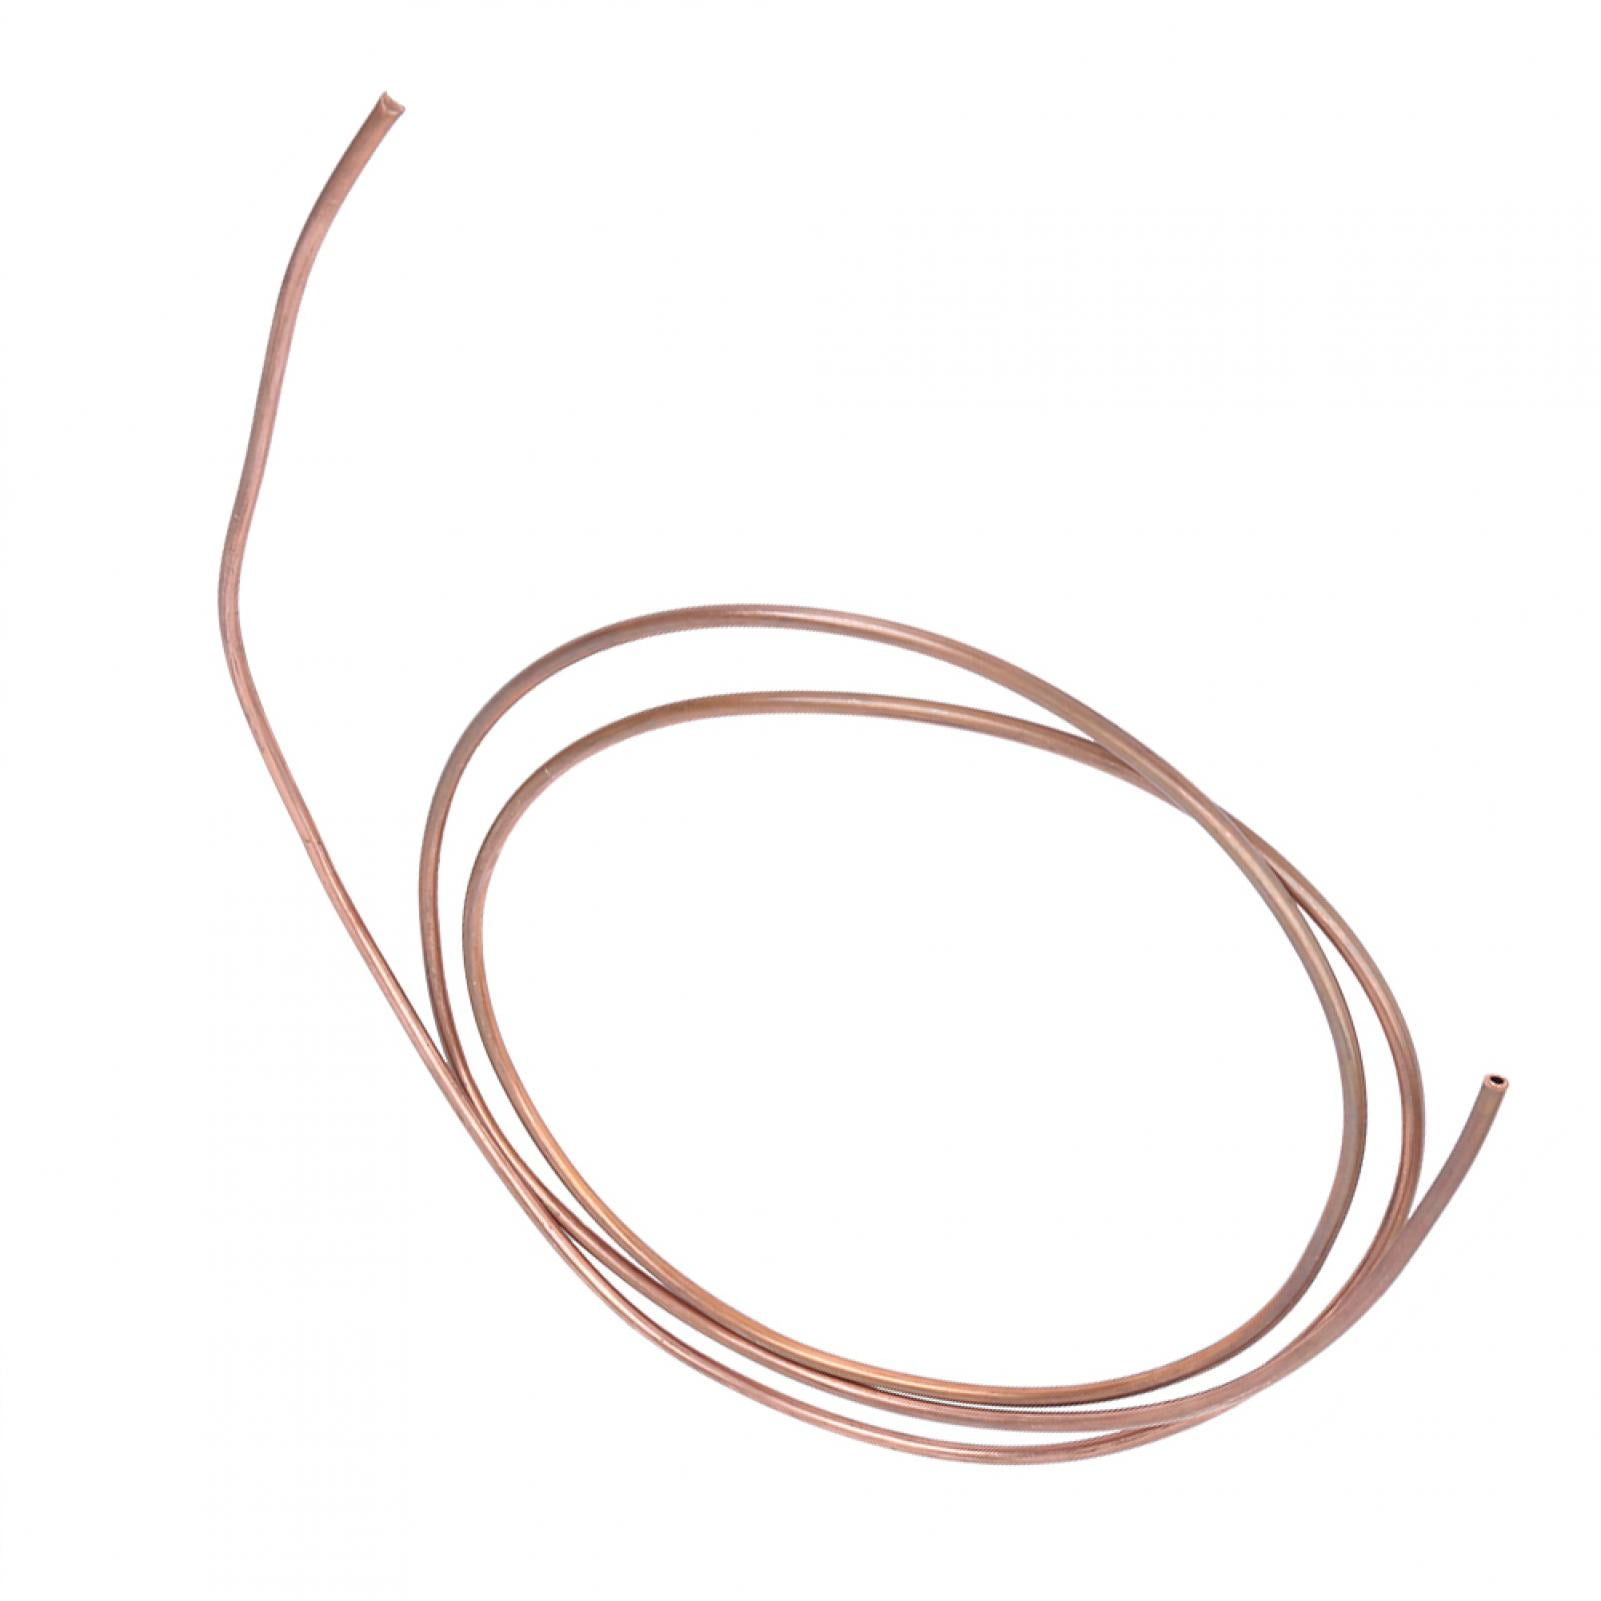 Refrigeration Tubing 4mm OD 2mm ID 6.5Ft Length T2 Copper Tubing Coil 